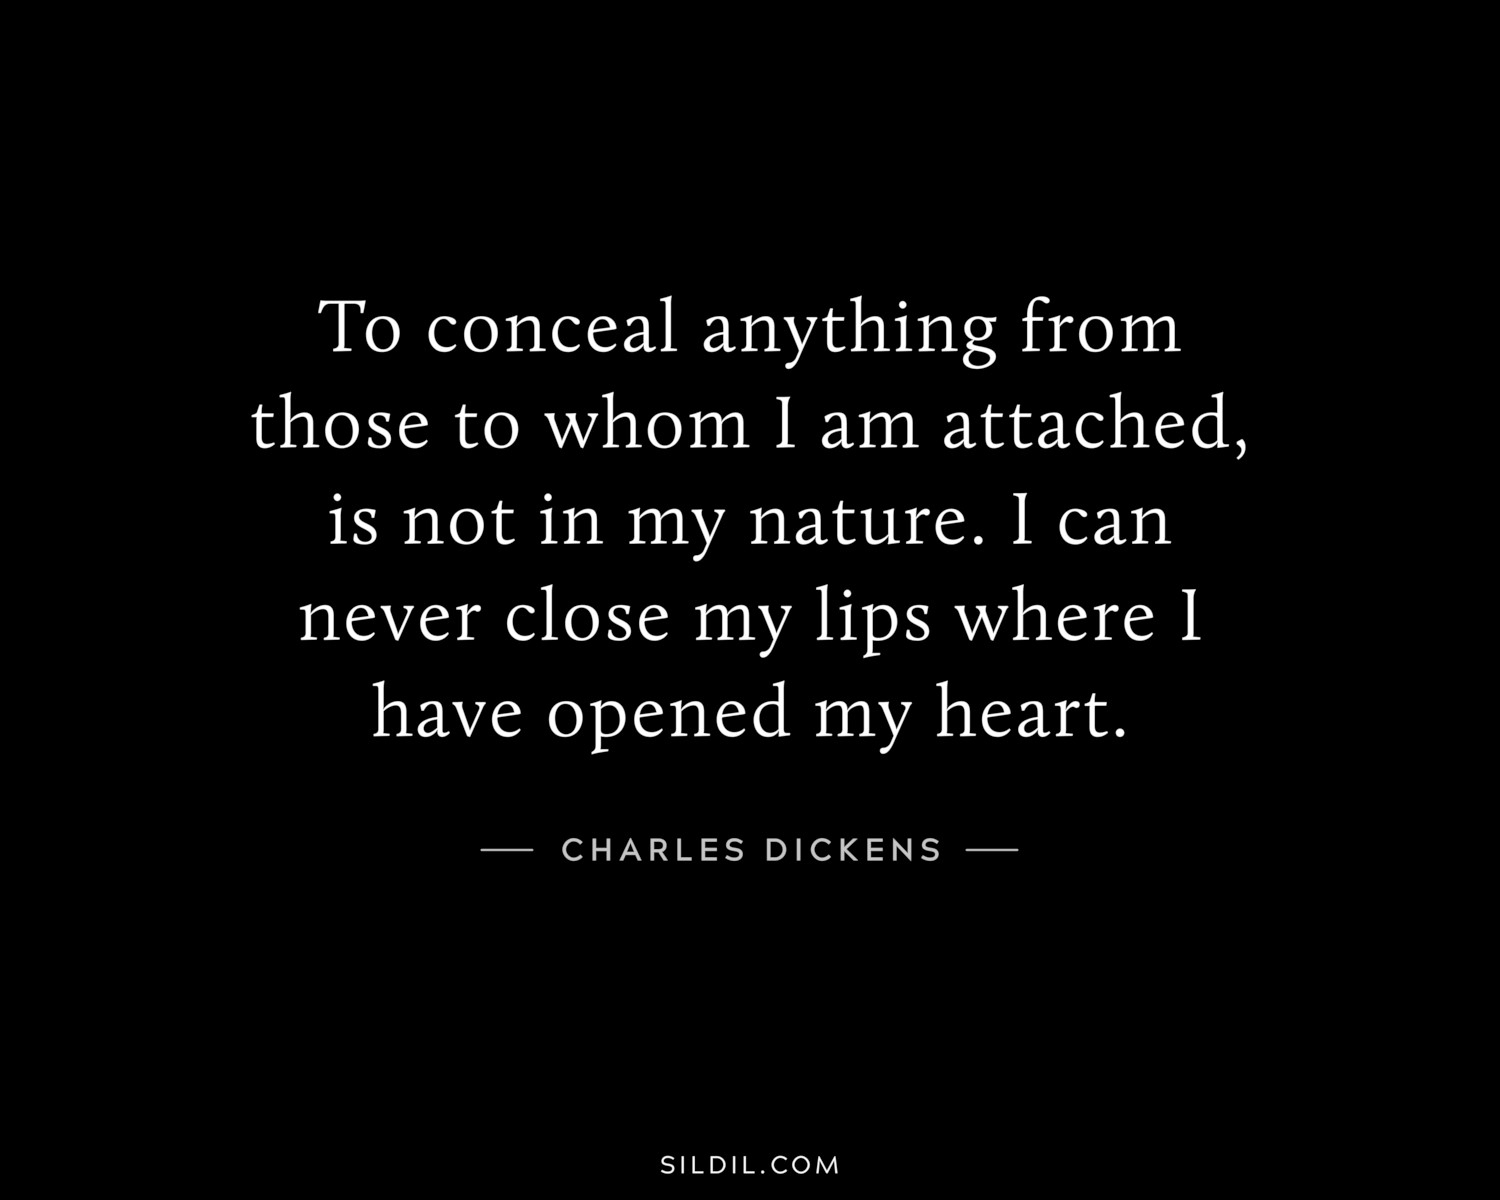 To conceal anything from those to whom I am attached, is not in my nature. I can never close my lips where I have opened my heart.